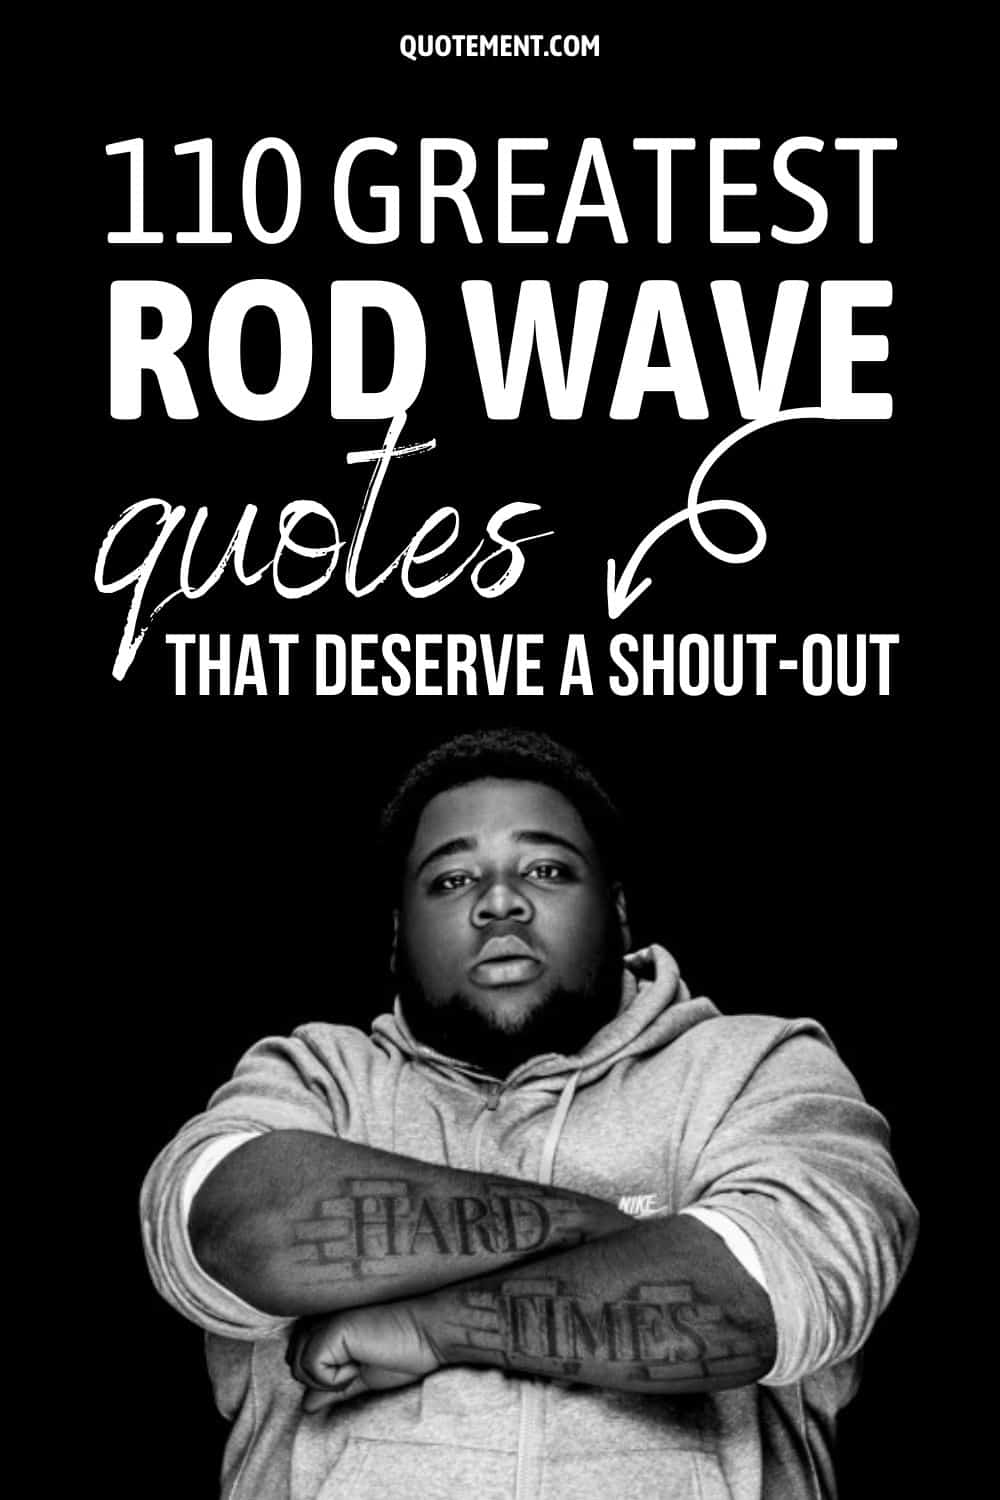 110 Greatest Rod Wave Quotes That Deserve A Shout-Out
